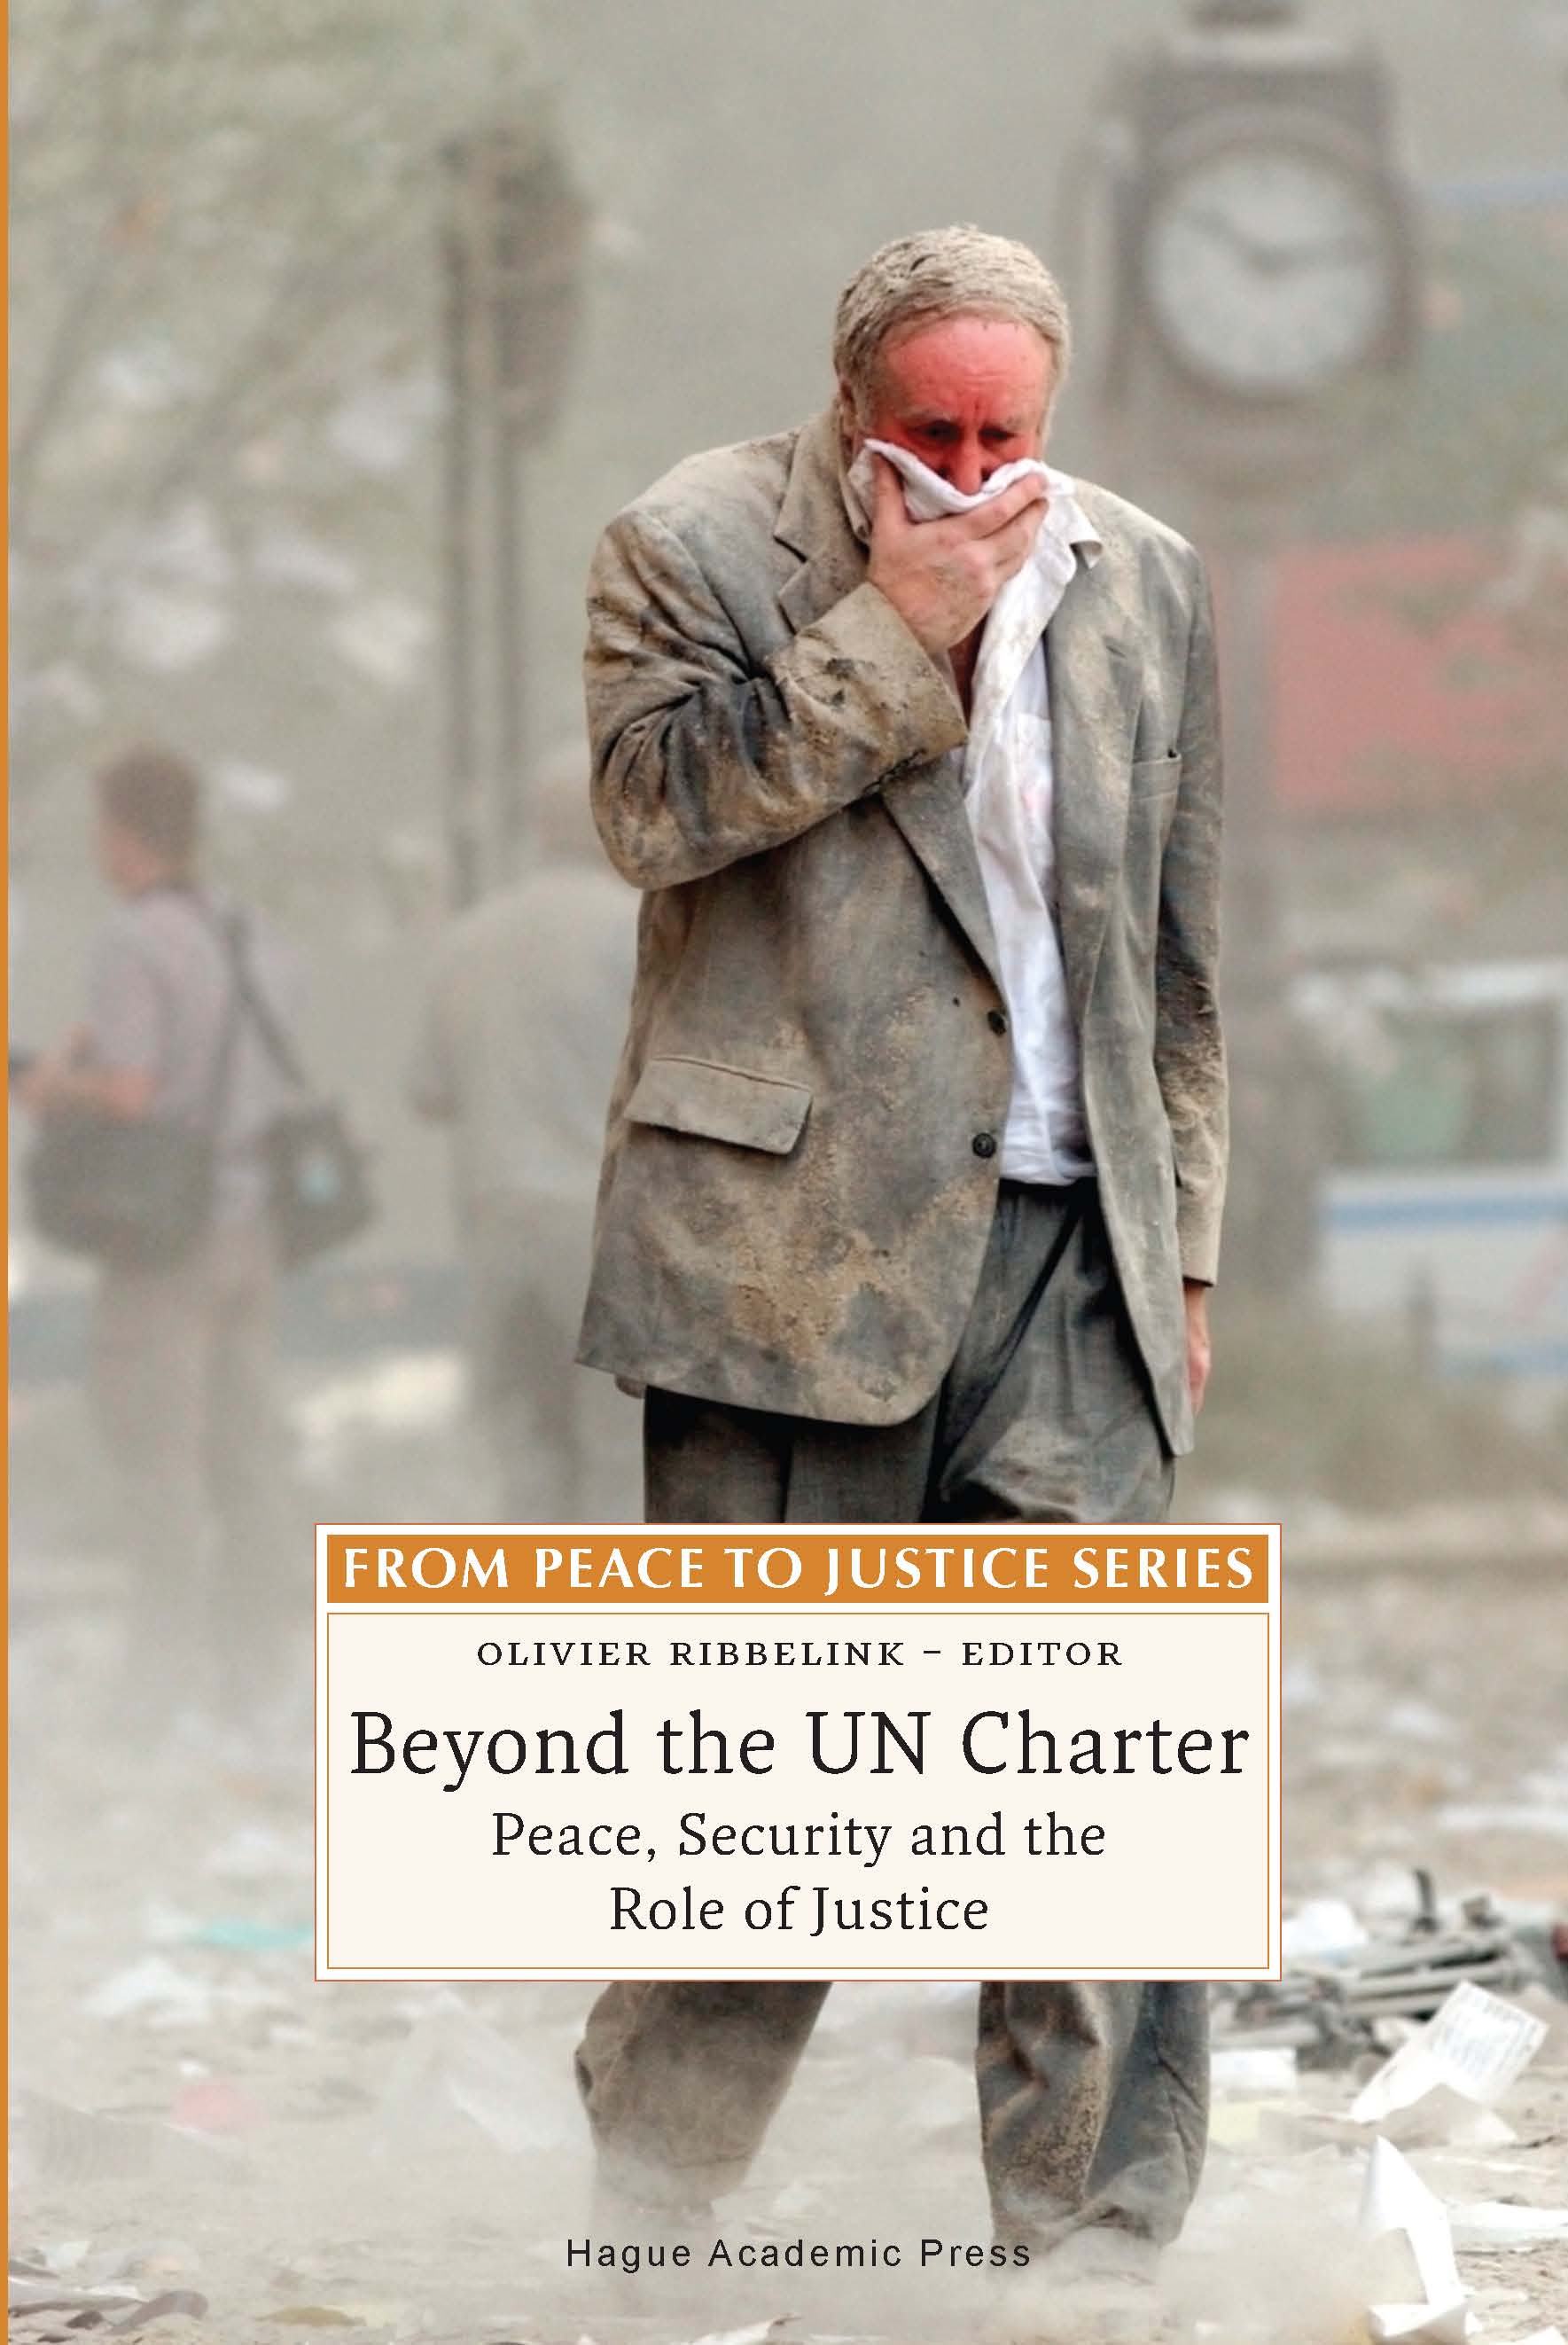 Beyond the UN Charter - Peace, Security and the Role of Justice